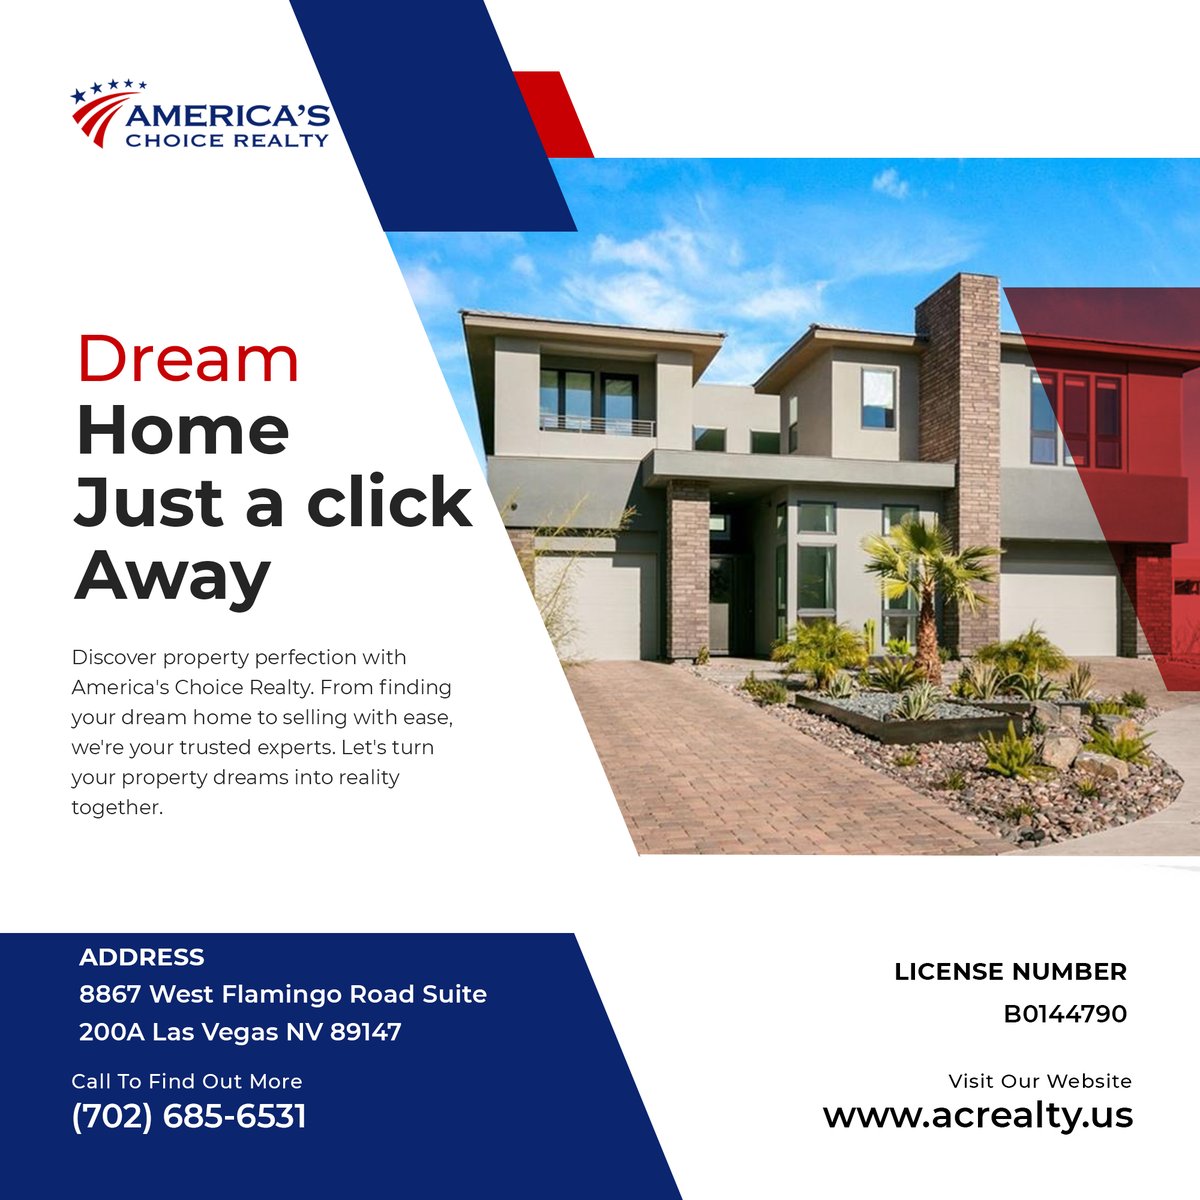 It only takes a click to get your ideal house. Look through our available properties and start living the life of your dreams now.
.
.
.
.
..
#realestateusa #realestate #realestateagent #realestateinvesting #realestatelife #realestateinvestor #realestatebroker #realestategoals